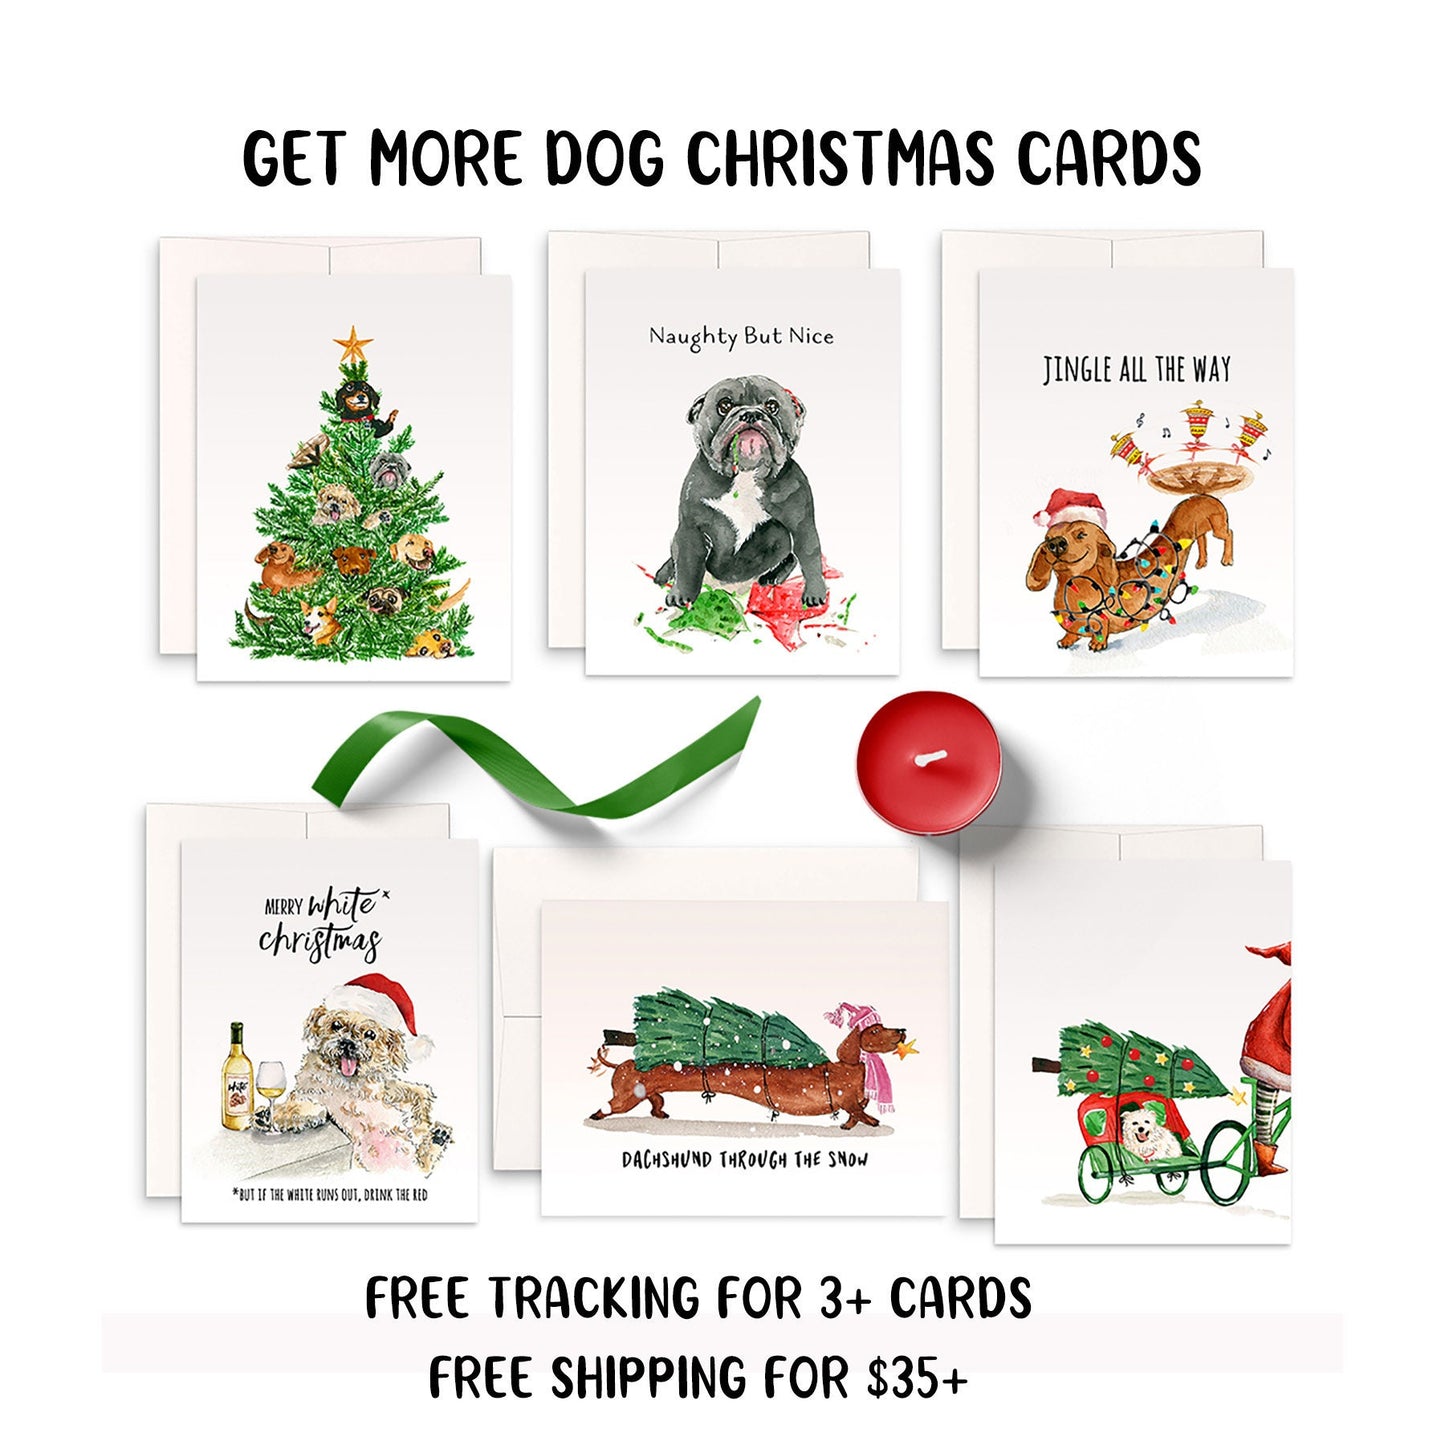 Winter Wonderland Dog Christmas Card Funny - All Is Bright Christmas Light - Pit bull Dog Holiday Cards Pack - Handmade By Liyana Studio